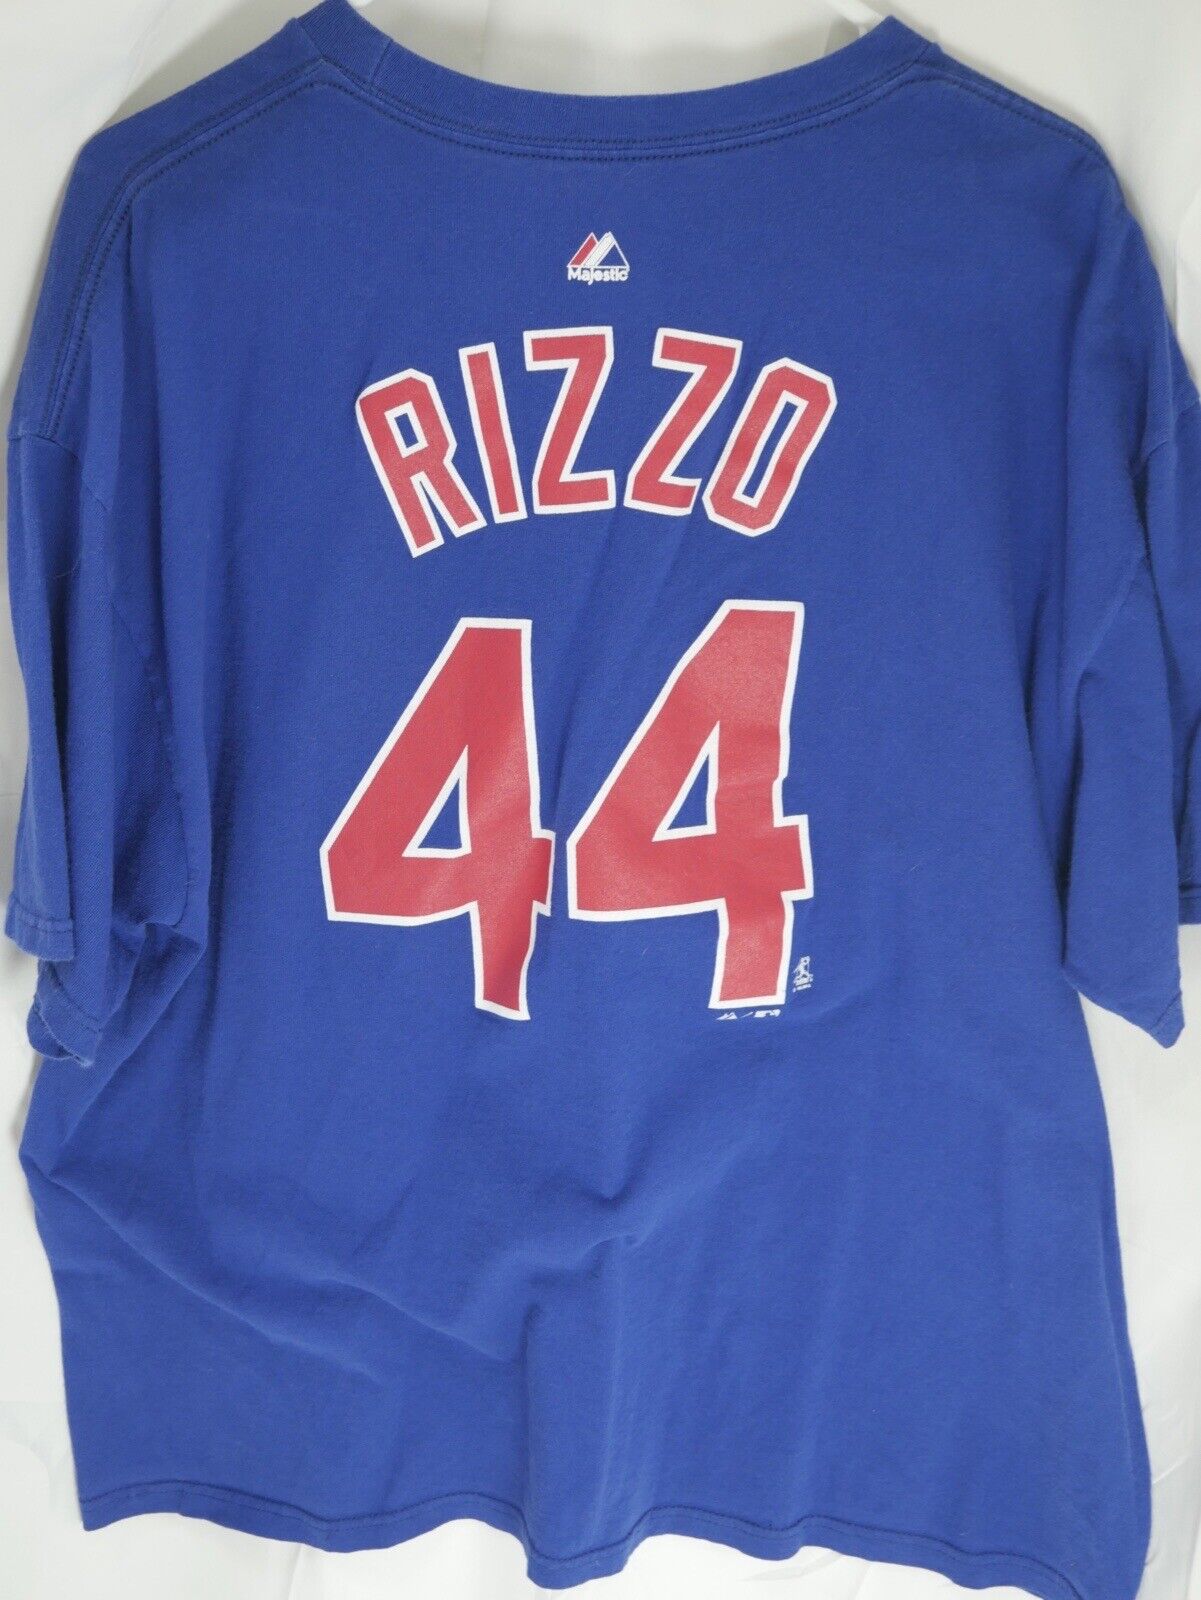 Chicago Cubs #44 Rizzo MLB Baseball Name Number Jersey Shirt